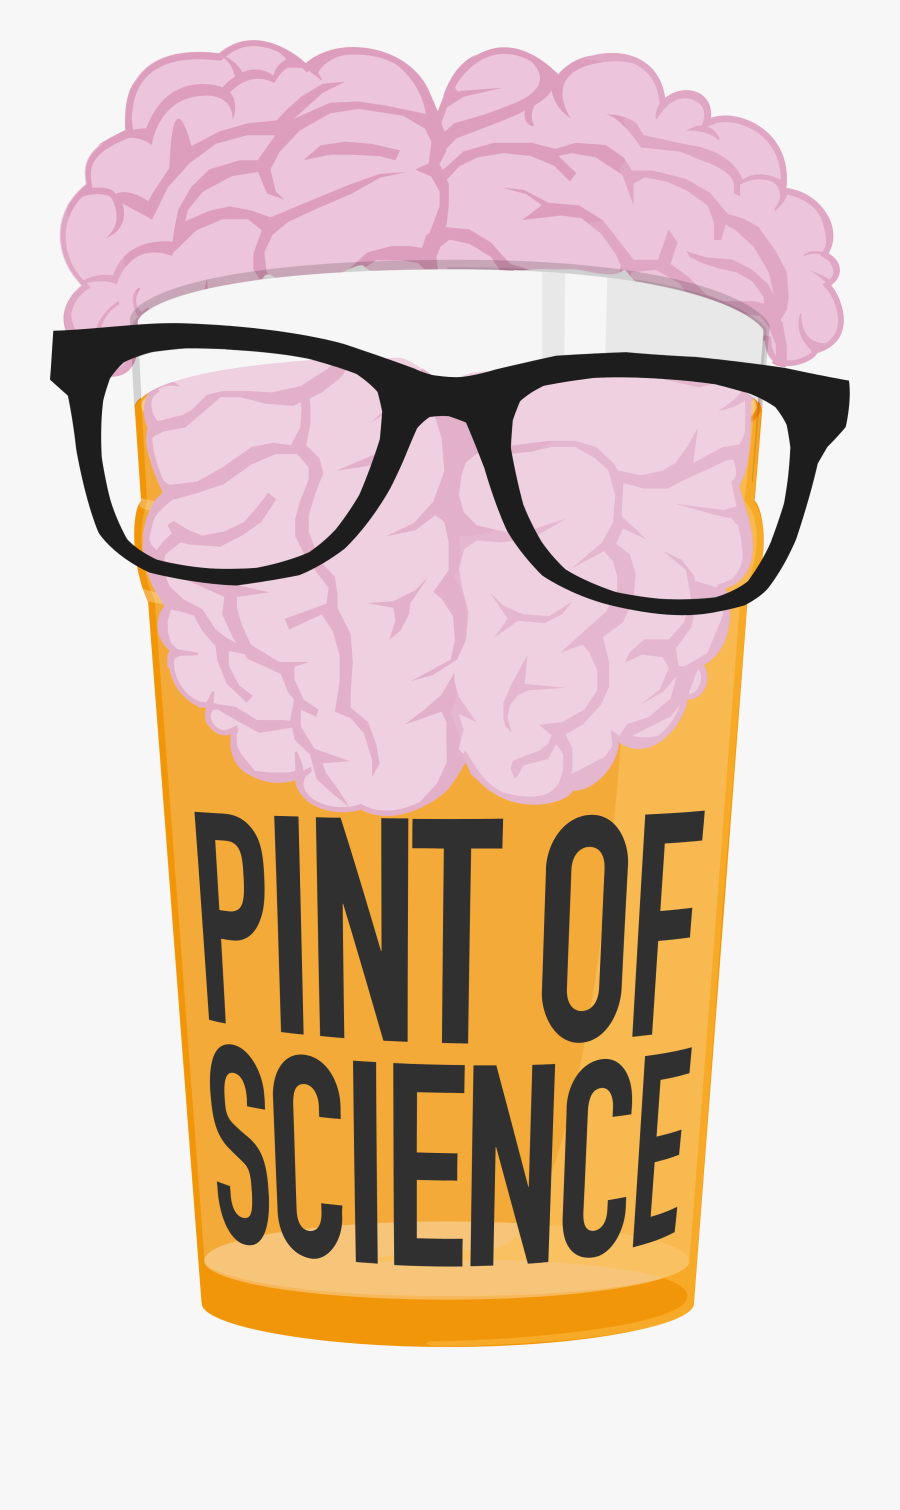 Pint Of Science Logo Png - Logo Pint Of Science, Transparent Clipart